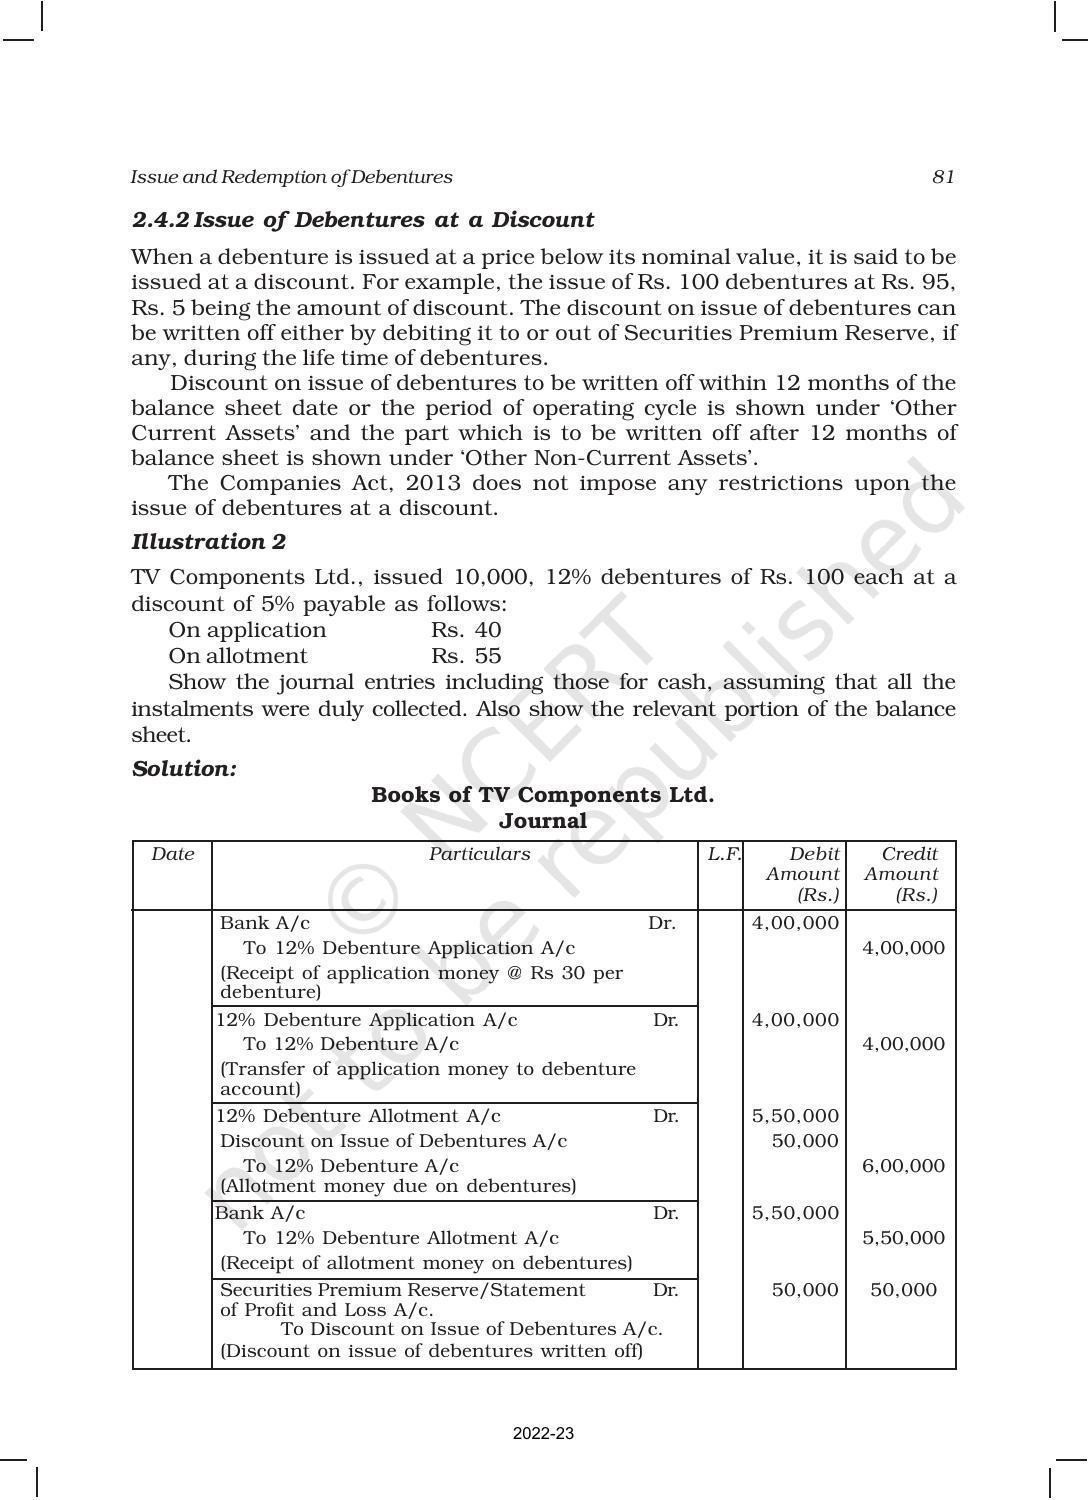 NCERT Book for Class 12 Accountancy Part II Chapter 1 Issue and Redemption of Debentures - Page 7